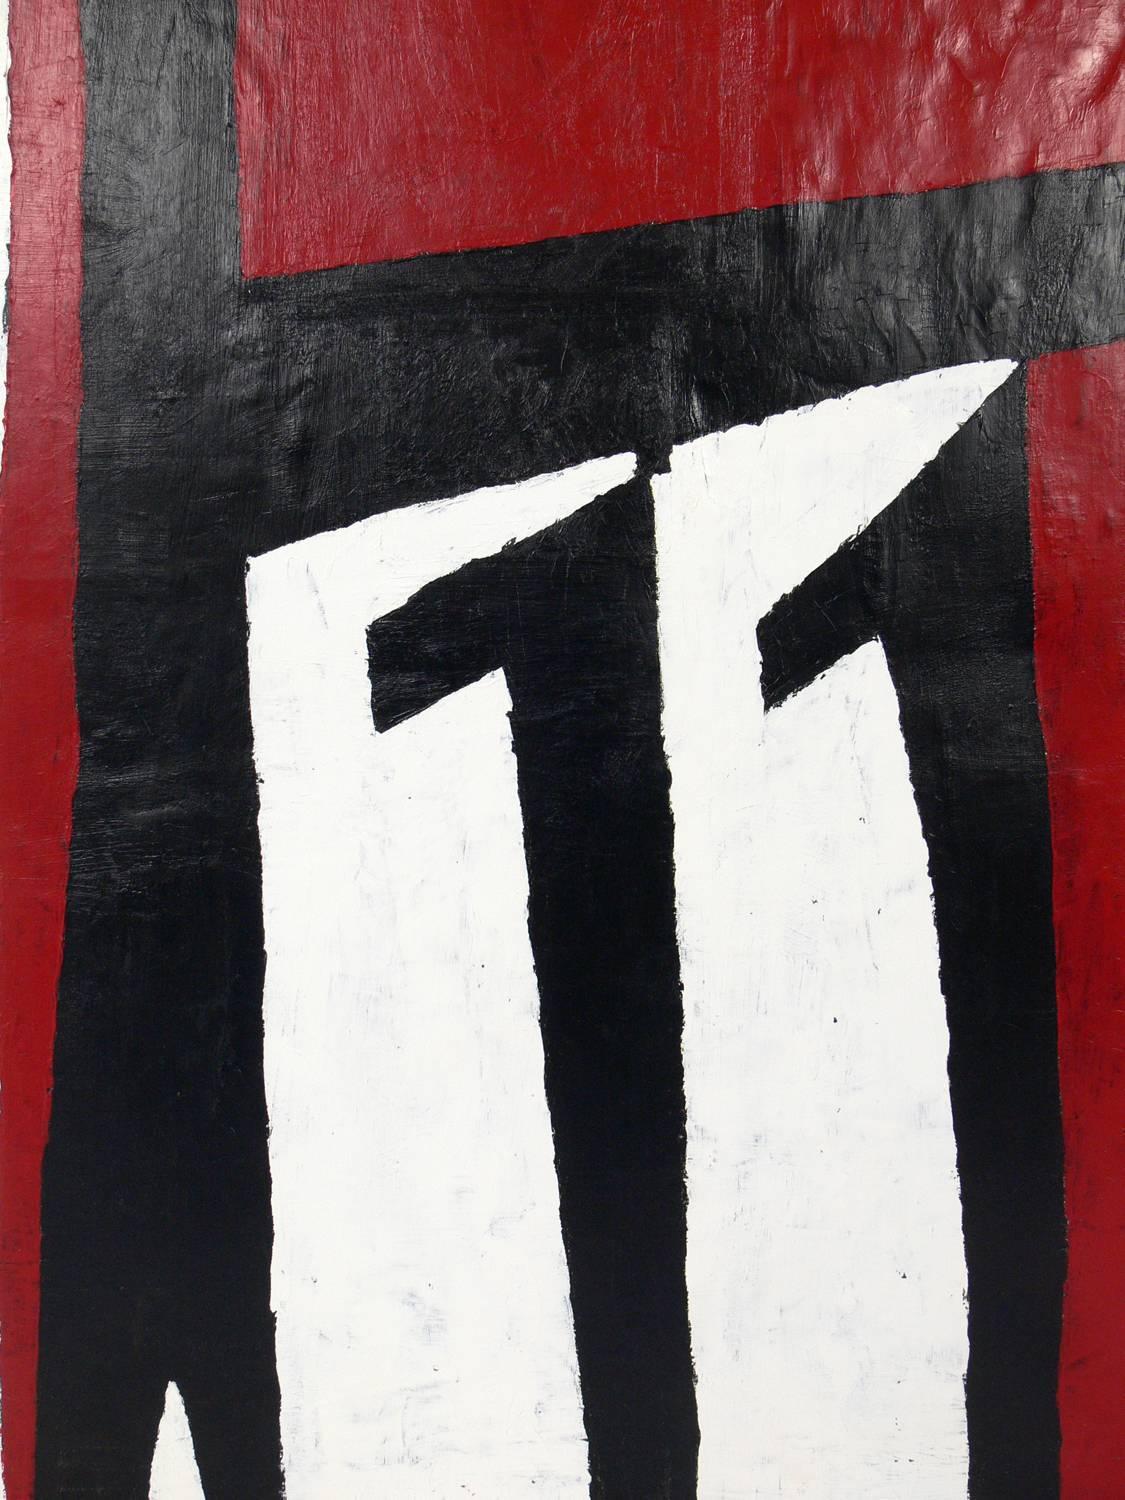 Mid-Century Modern Abstract Red and Black Painting after Robert Motherwell